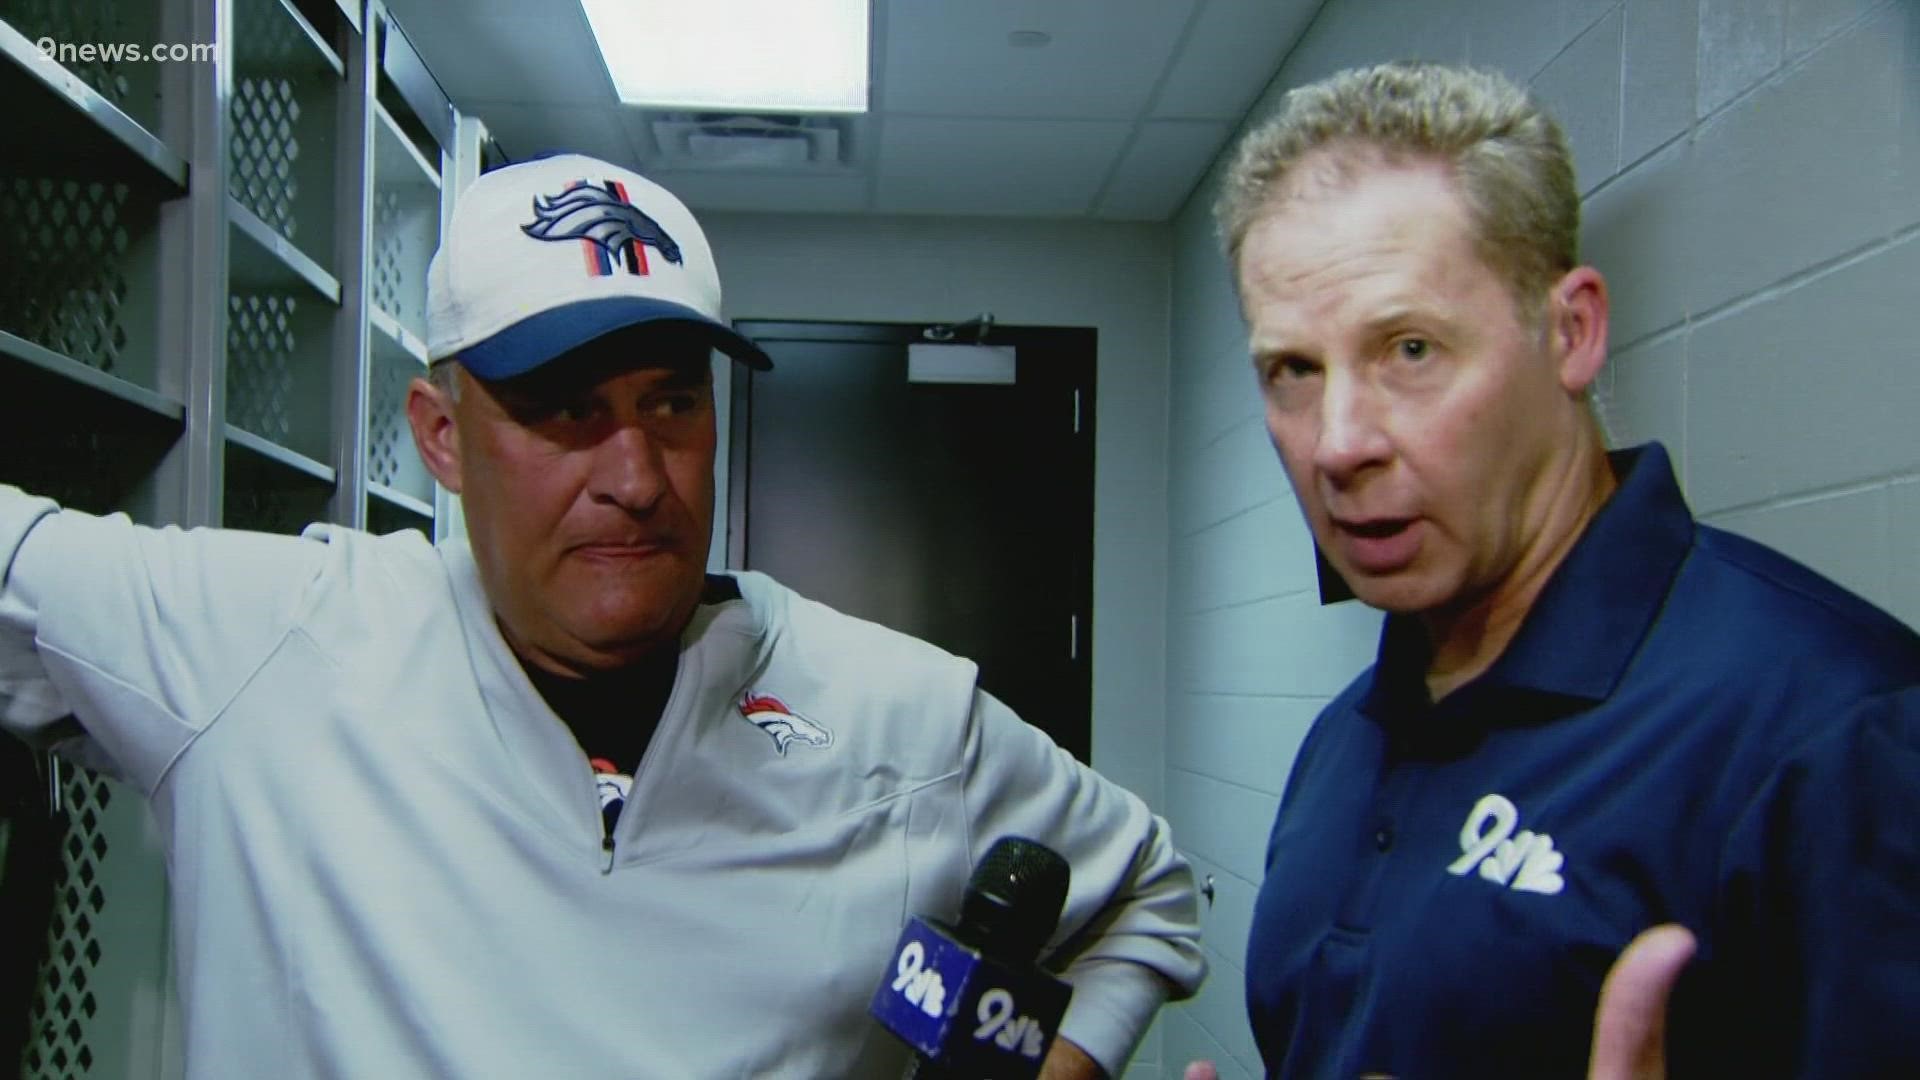 Rod Mackey caught up with Denver Broncos head coach Vic Fangio after his team's preseason opener against the Minnesota Vikings.